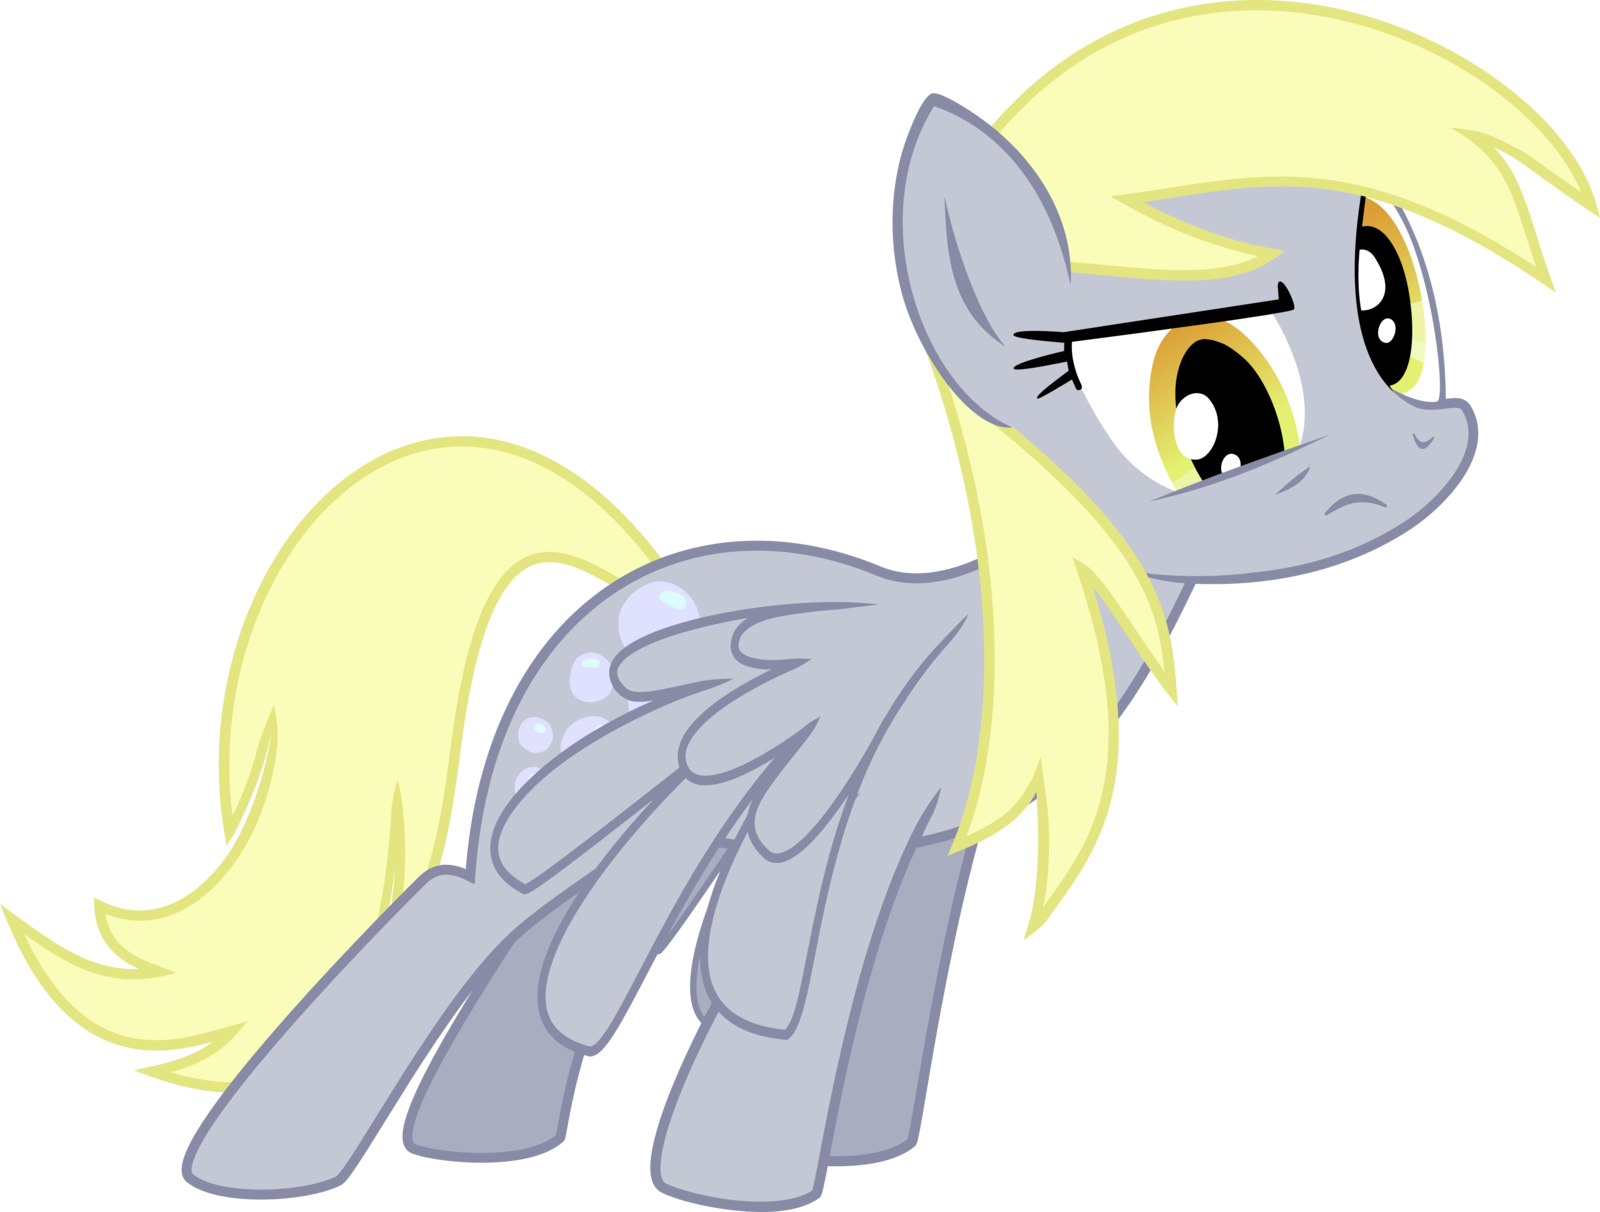 derpy_hooves_is_confused____by_blackgryp